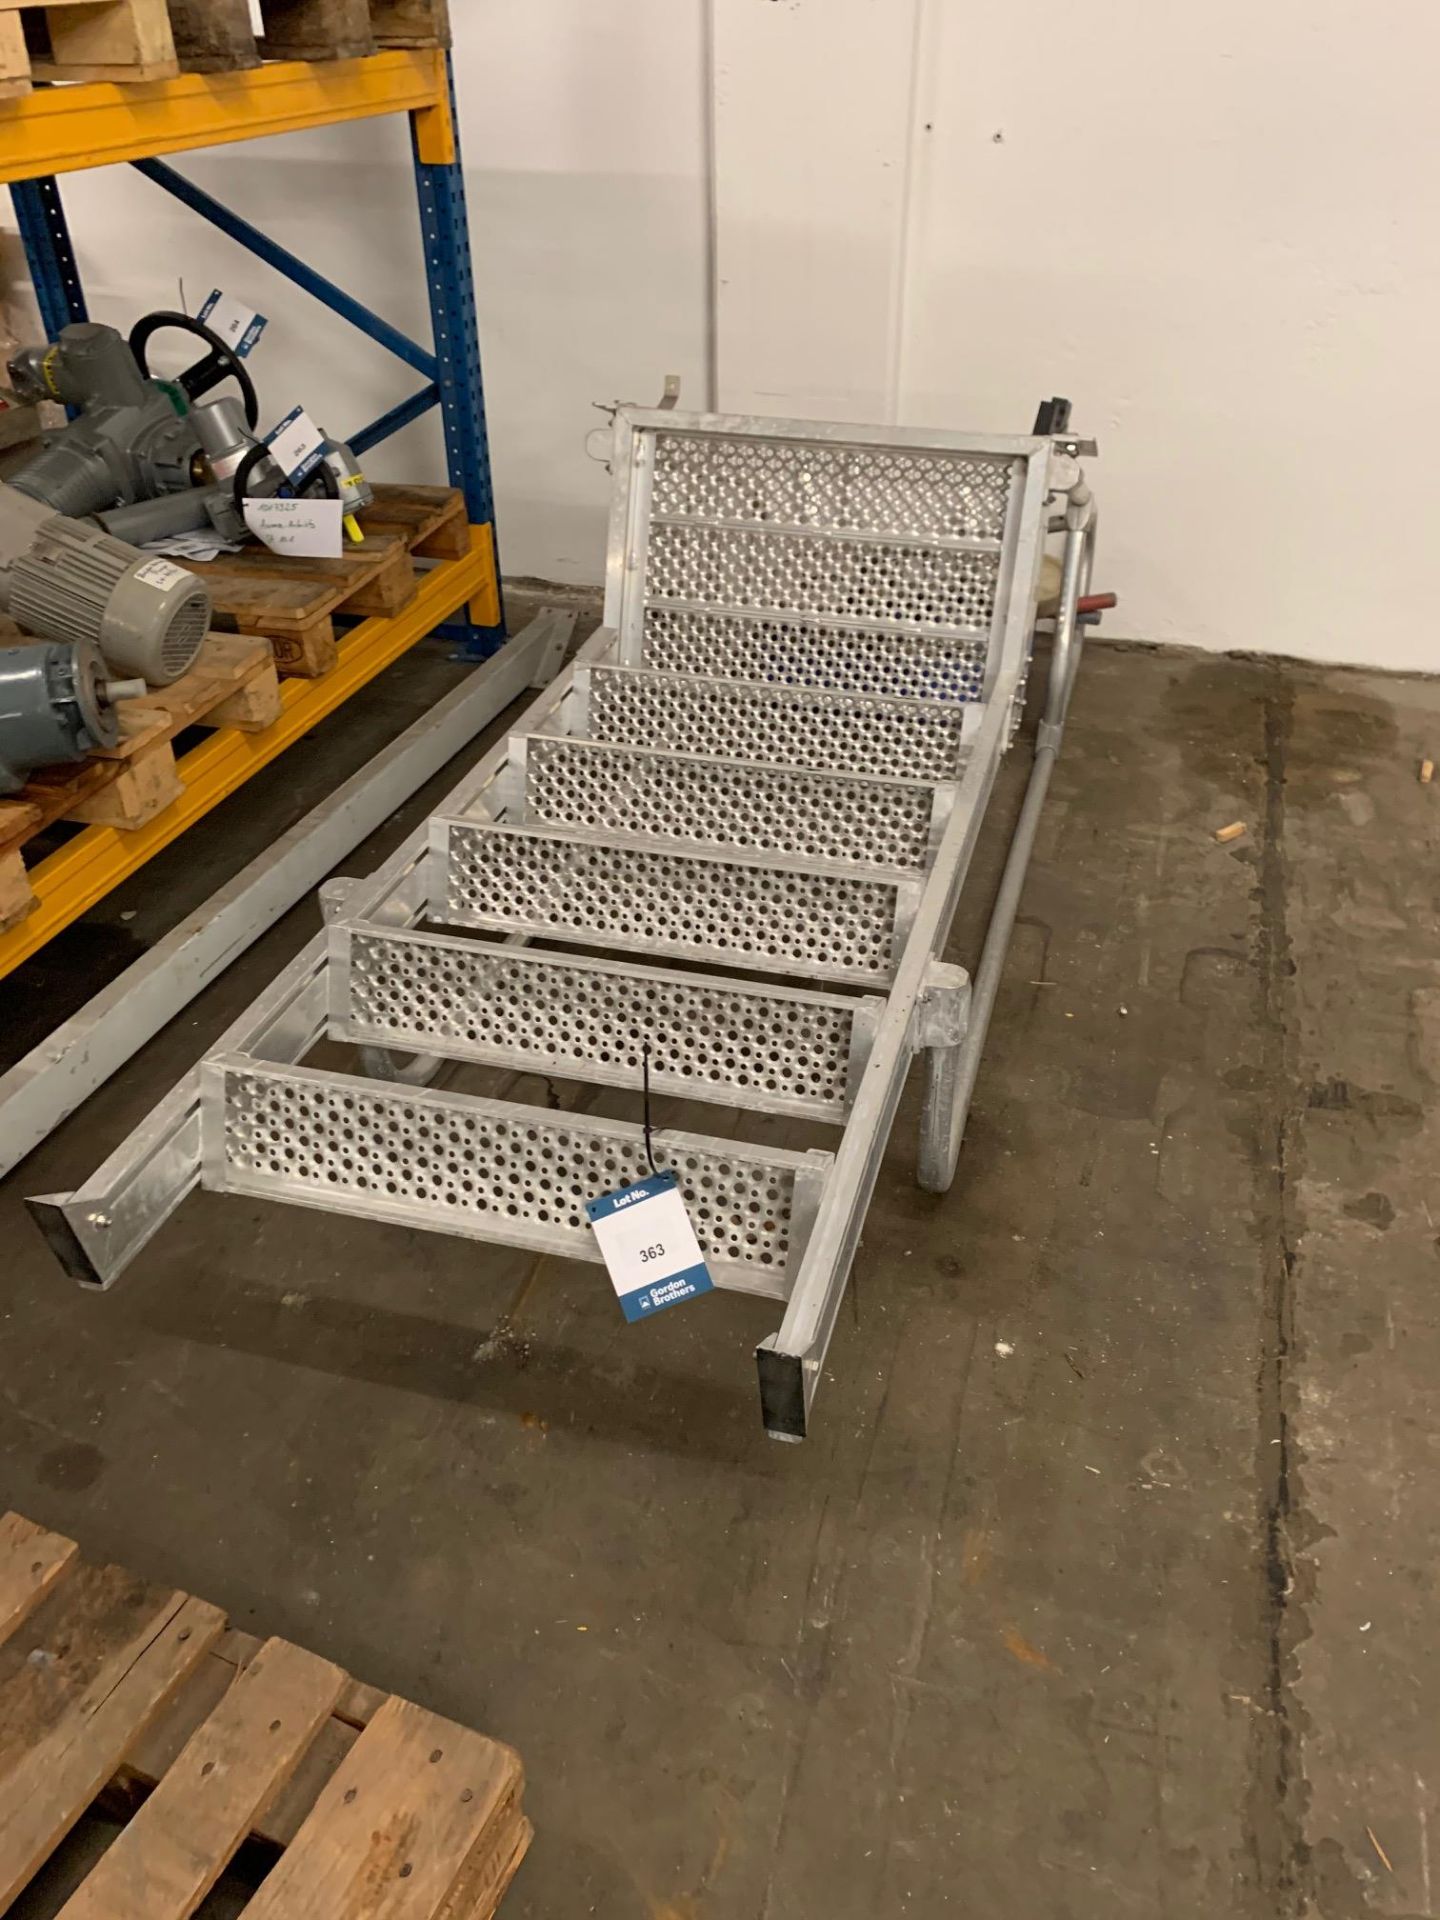 1 x Aluminum ladder incl. box with 4 wheels.